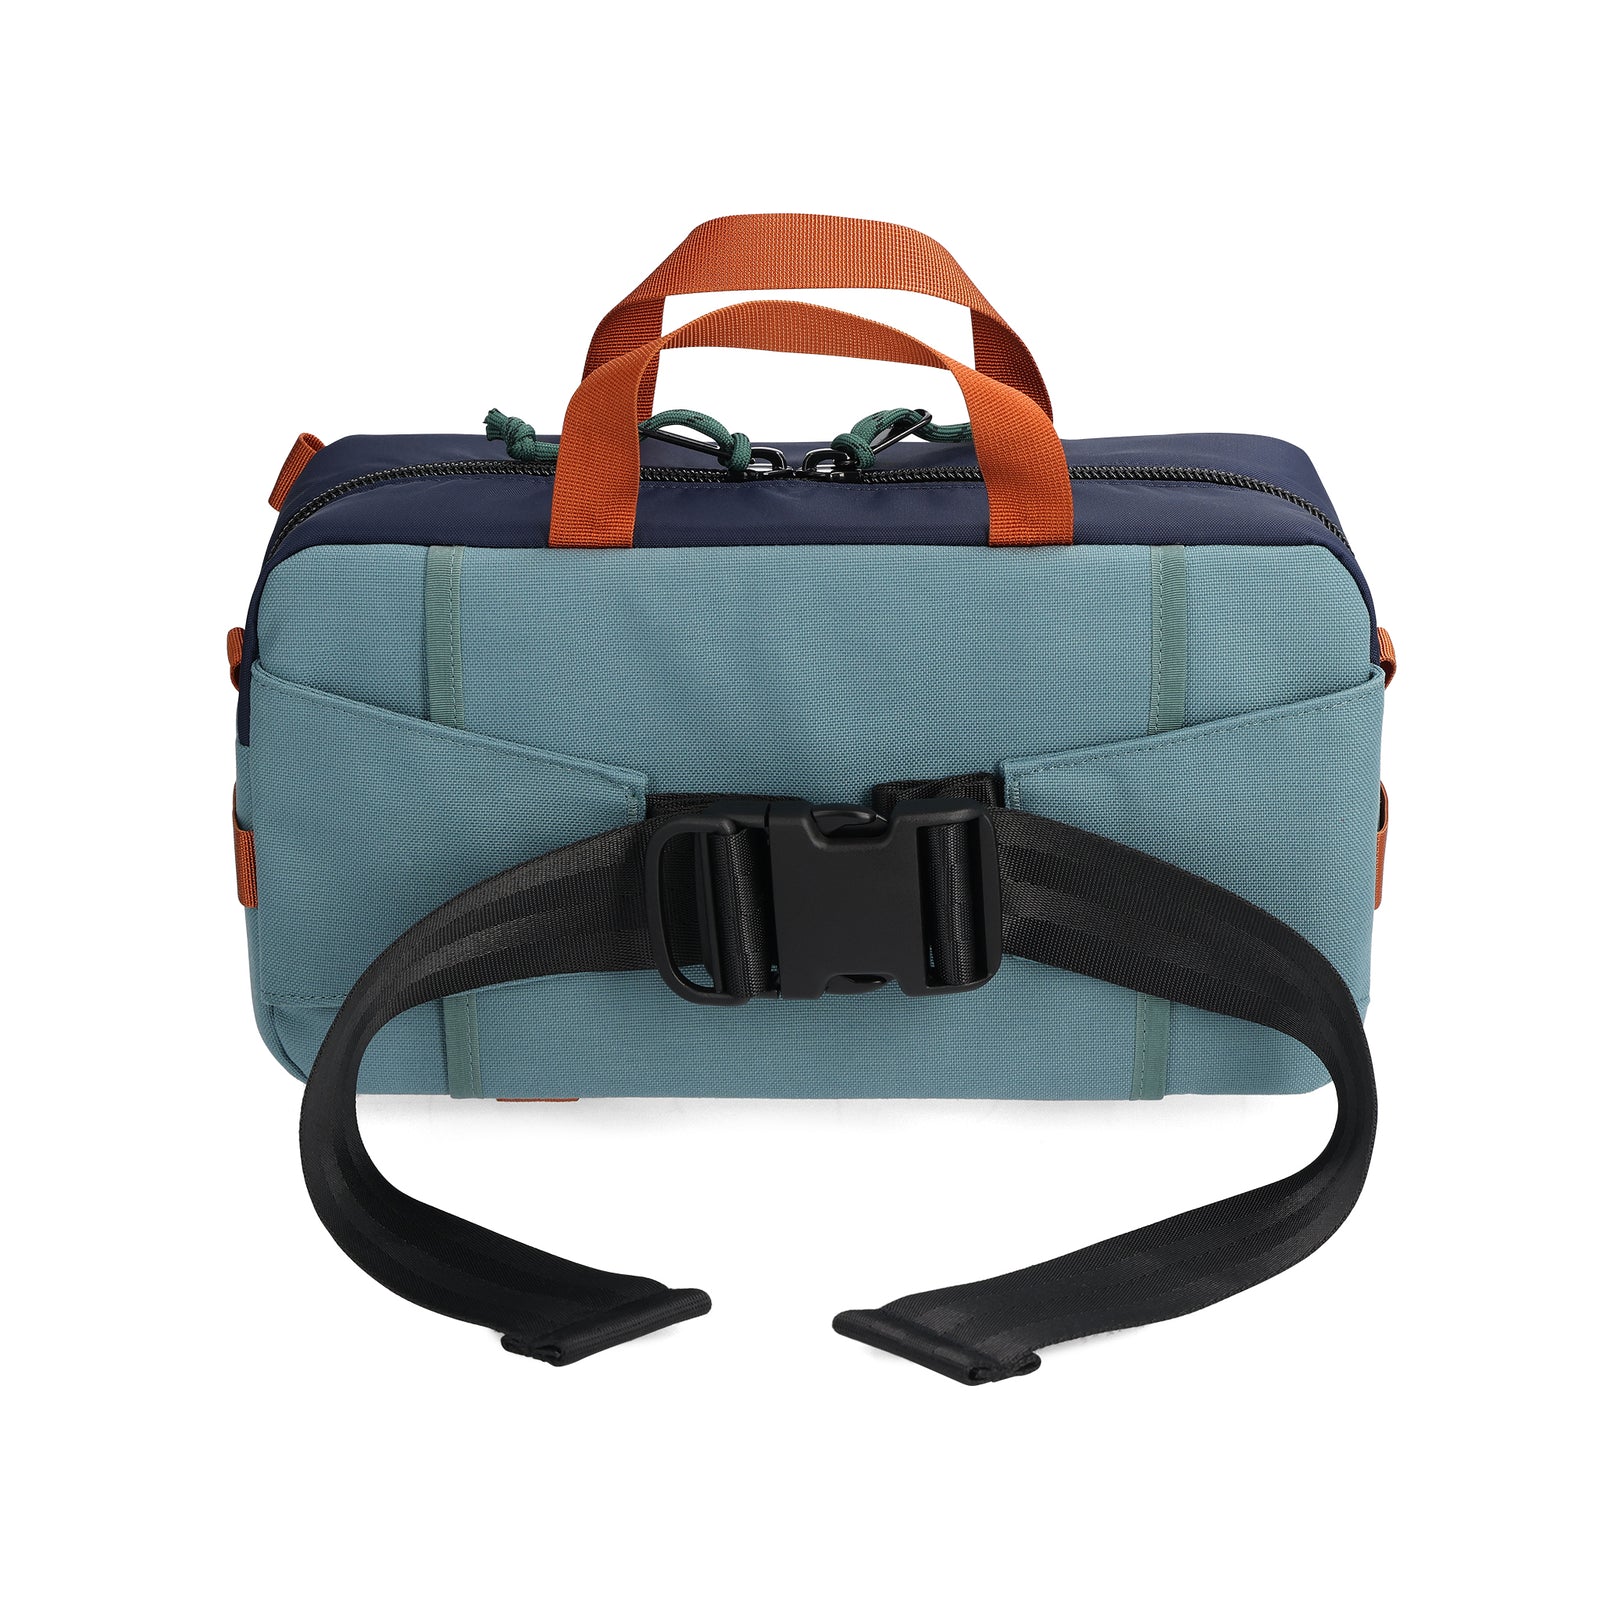 Back View of Topo Designs Quick Pack  in "Navy / Mustard"